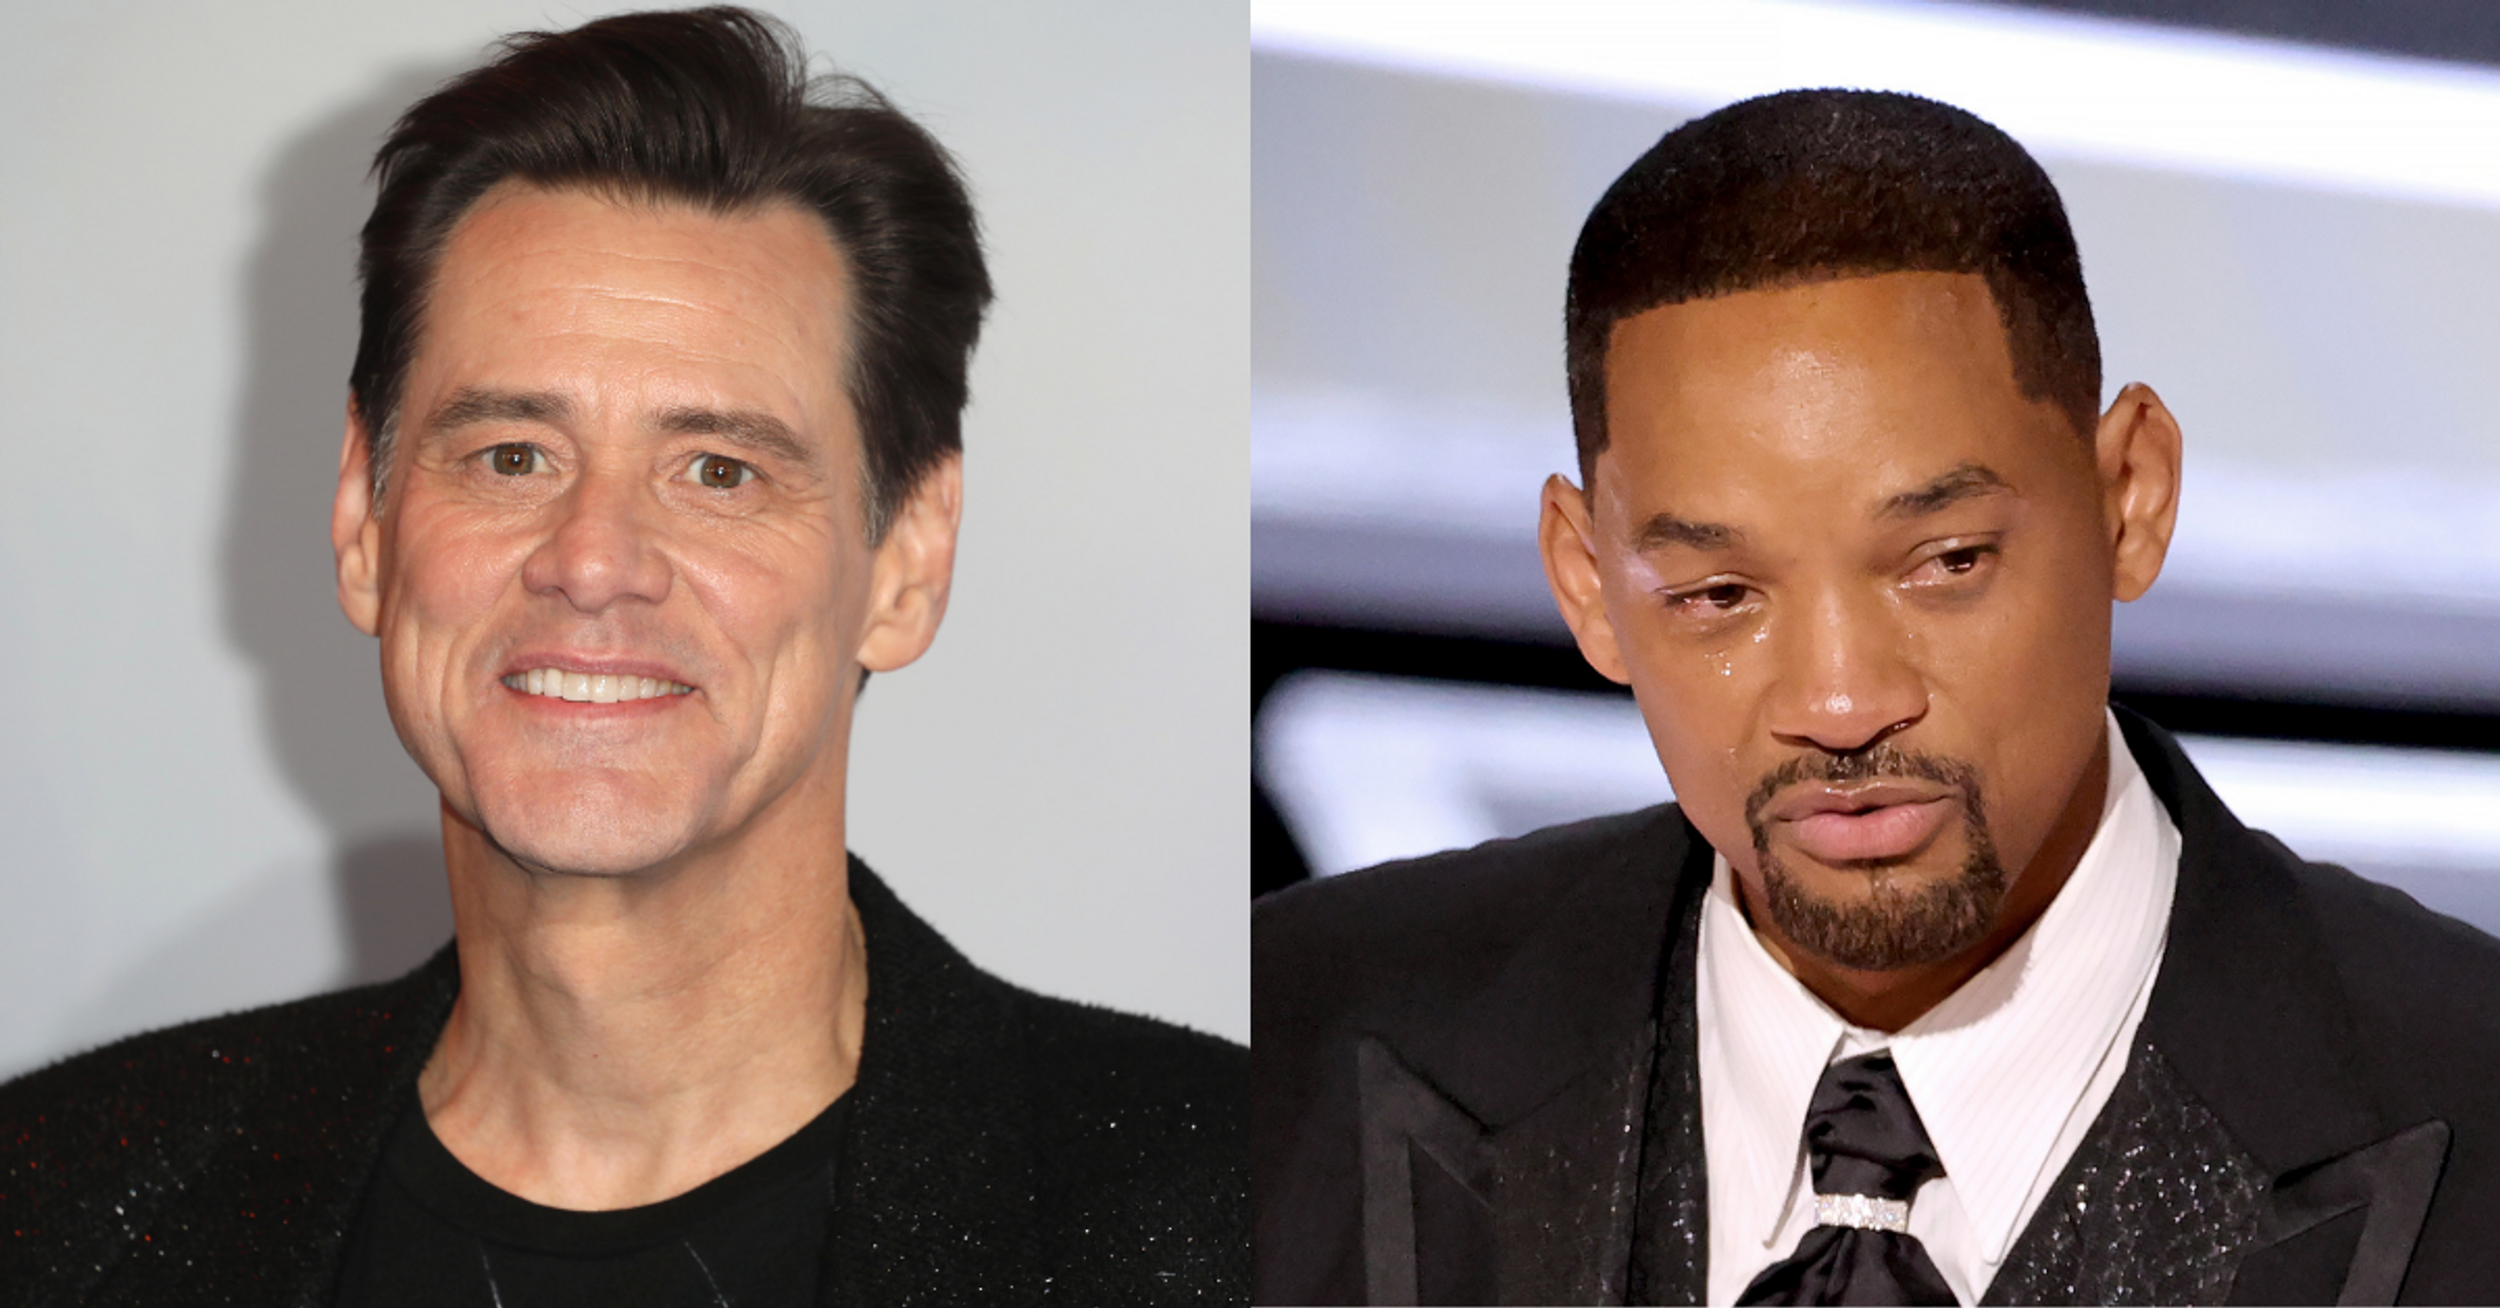 Jim Carrey Rips 'Spineless' Oscars Attendees For Giving Will Smith A Standing Ovation: 'I Was Sickened'